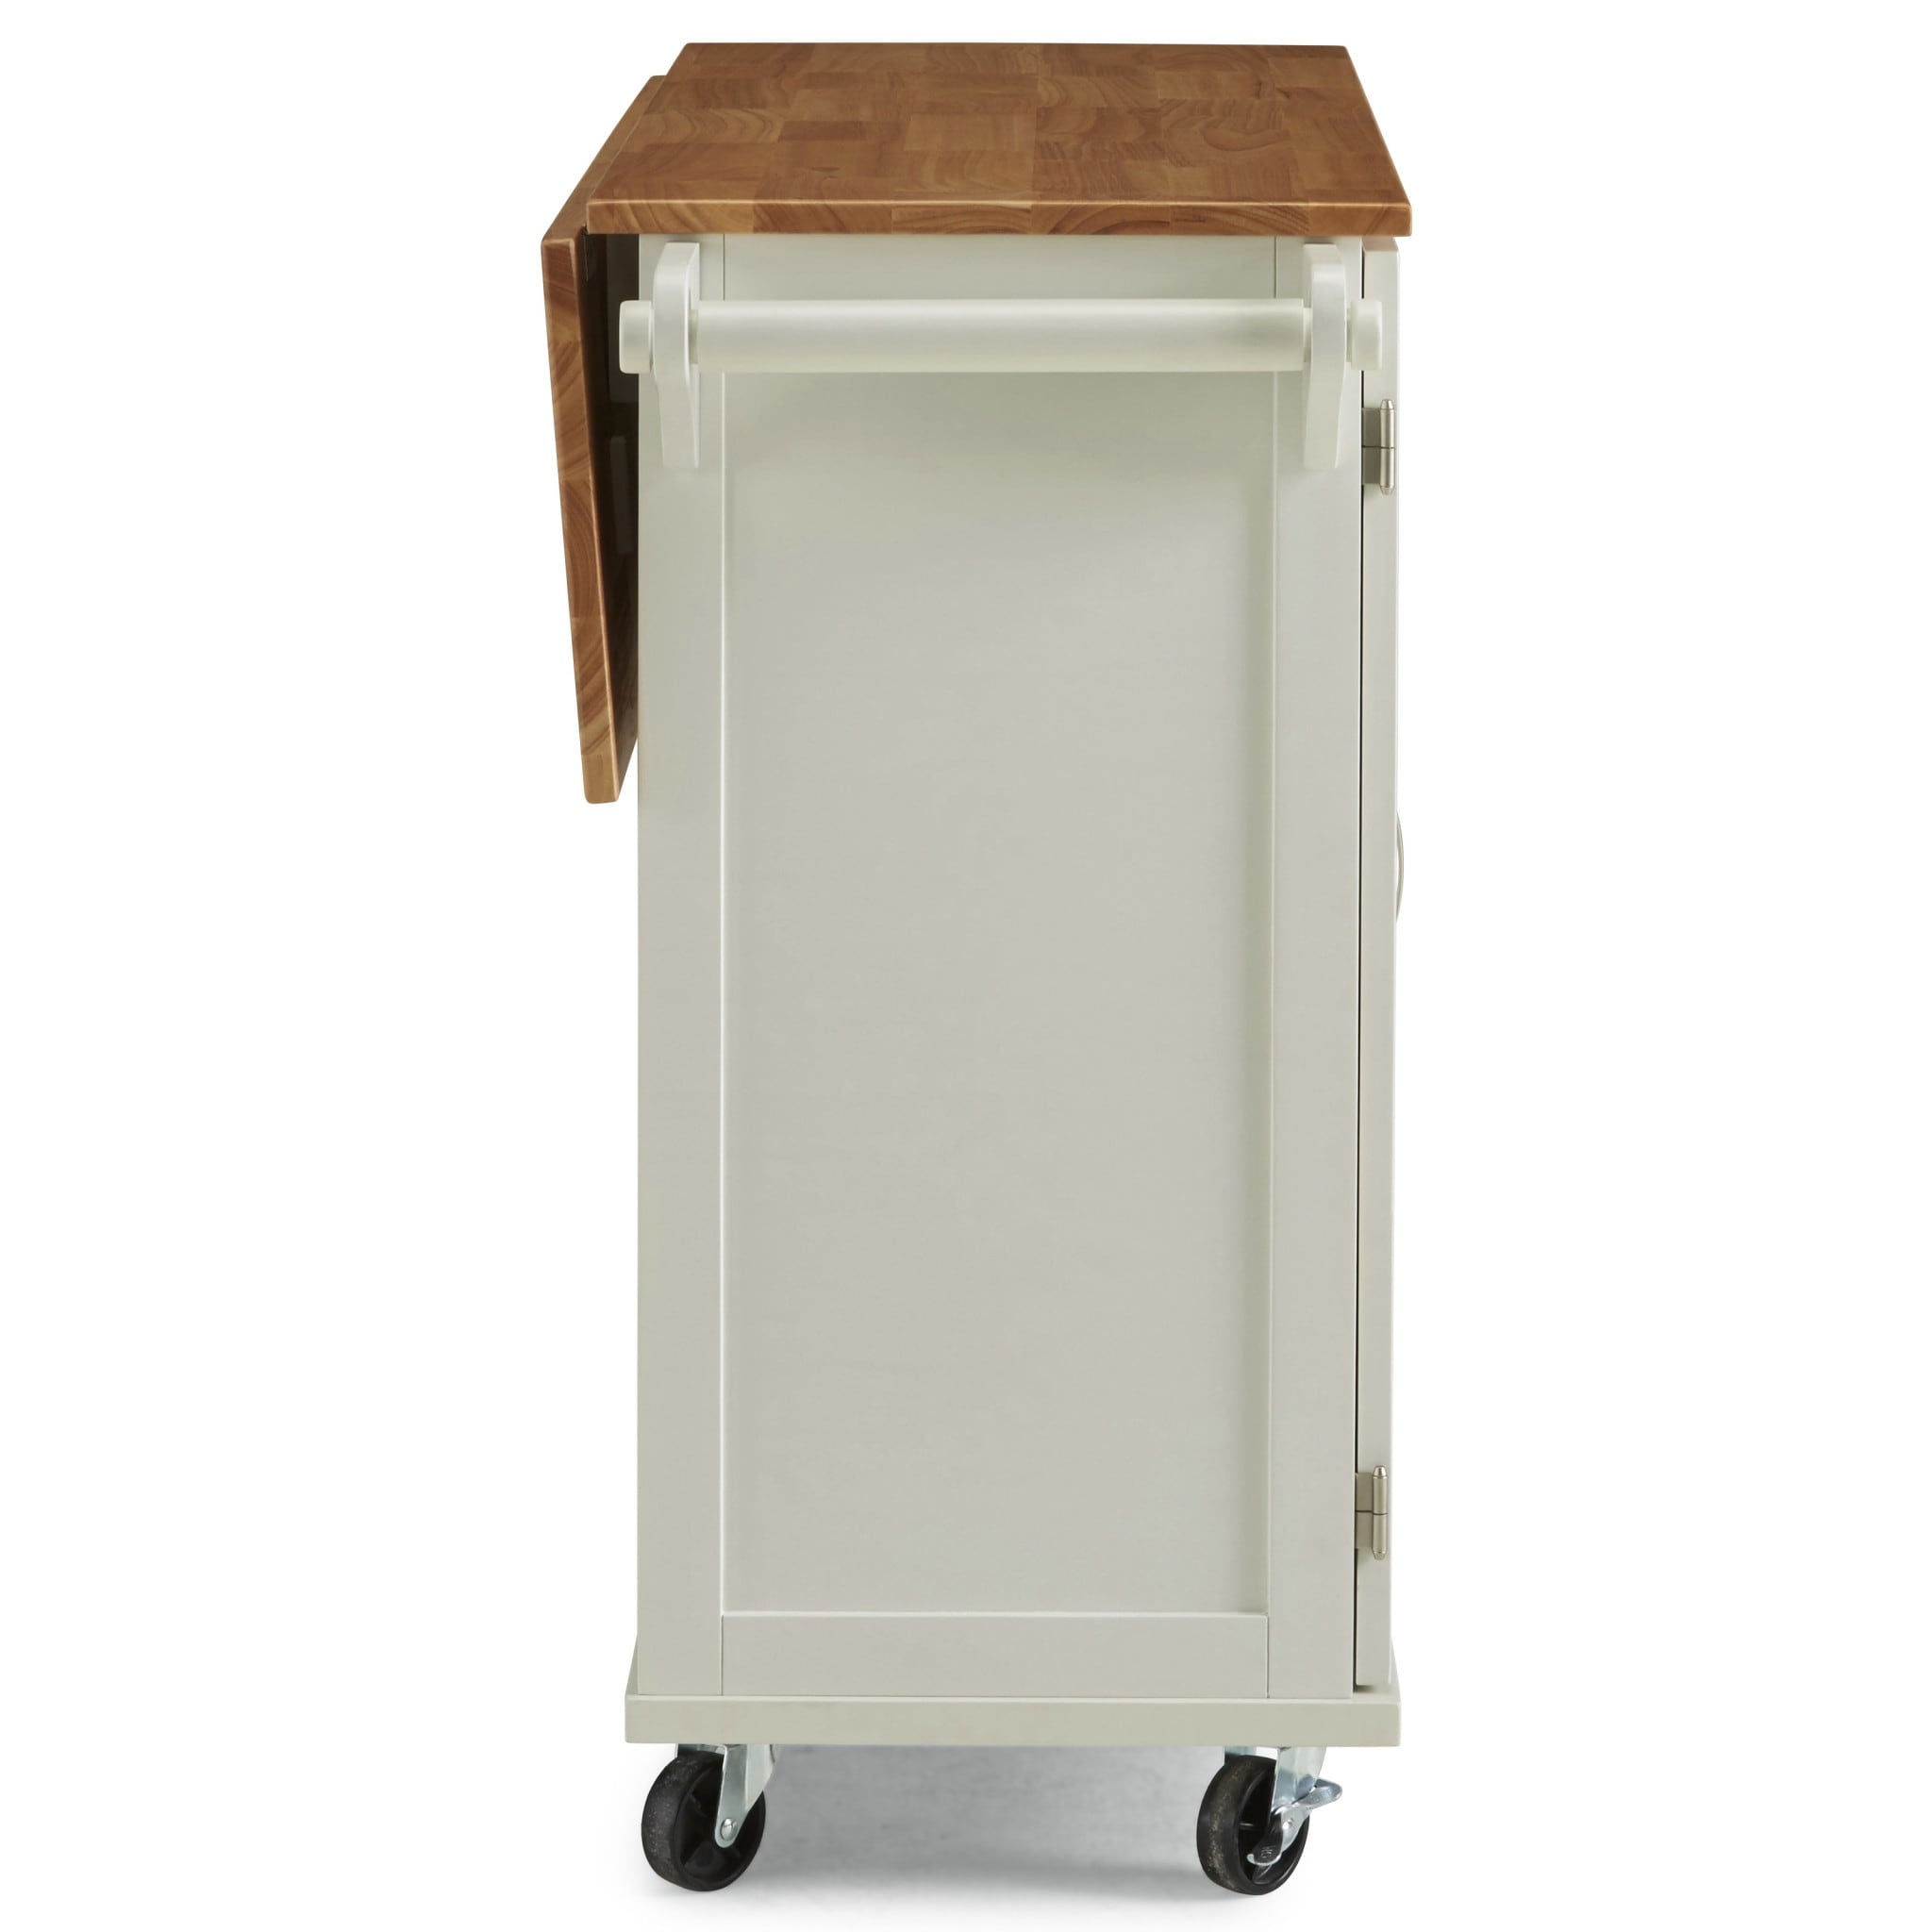 HOMESTYLES Dolly Madison Sage Green Kitchen Cart with Natural Wood